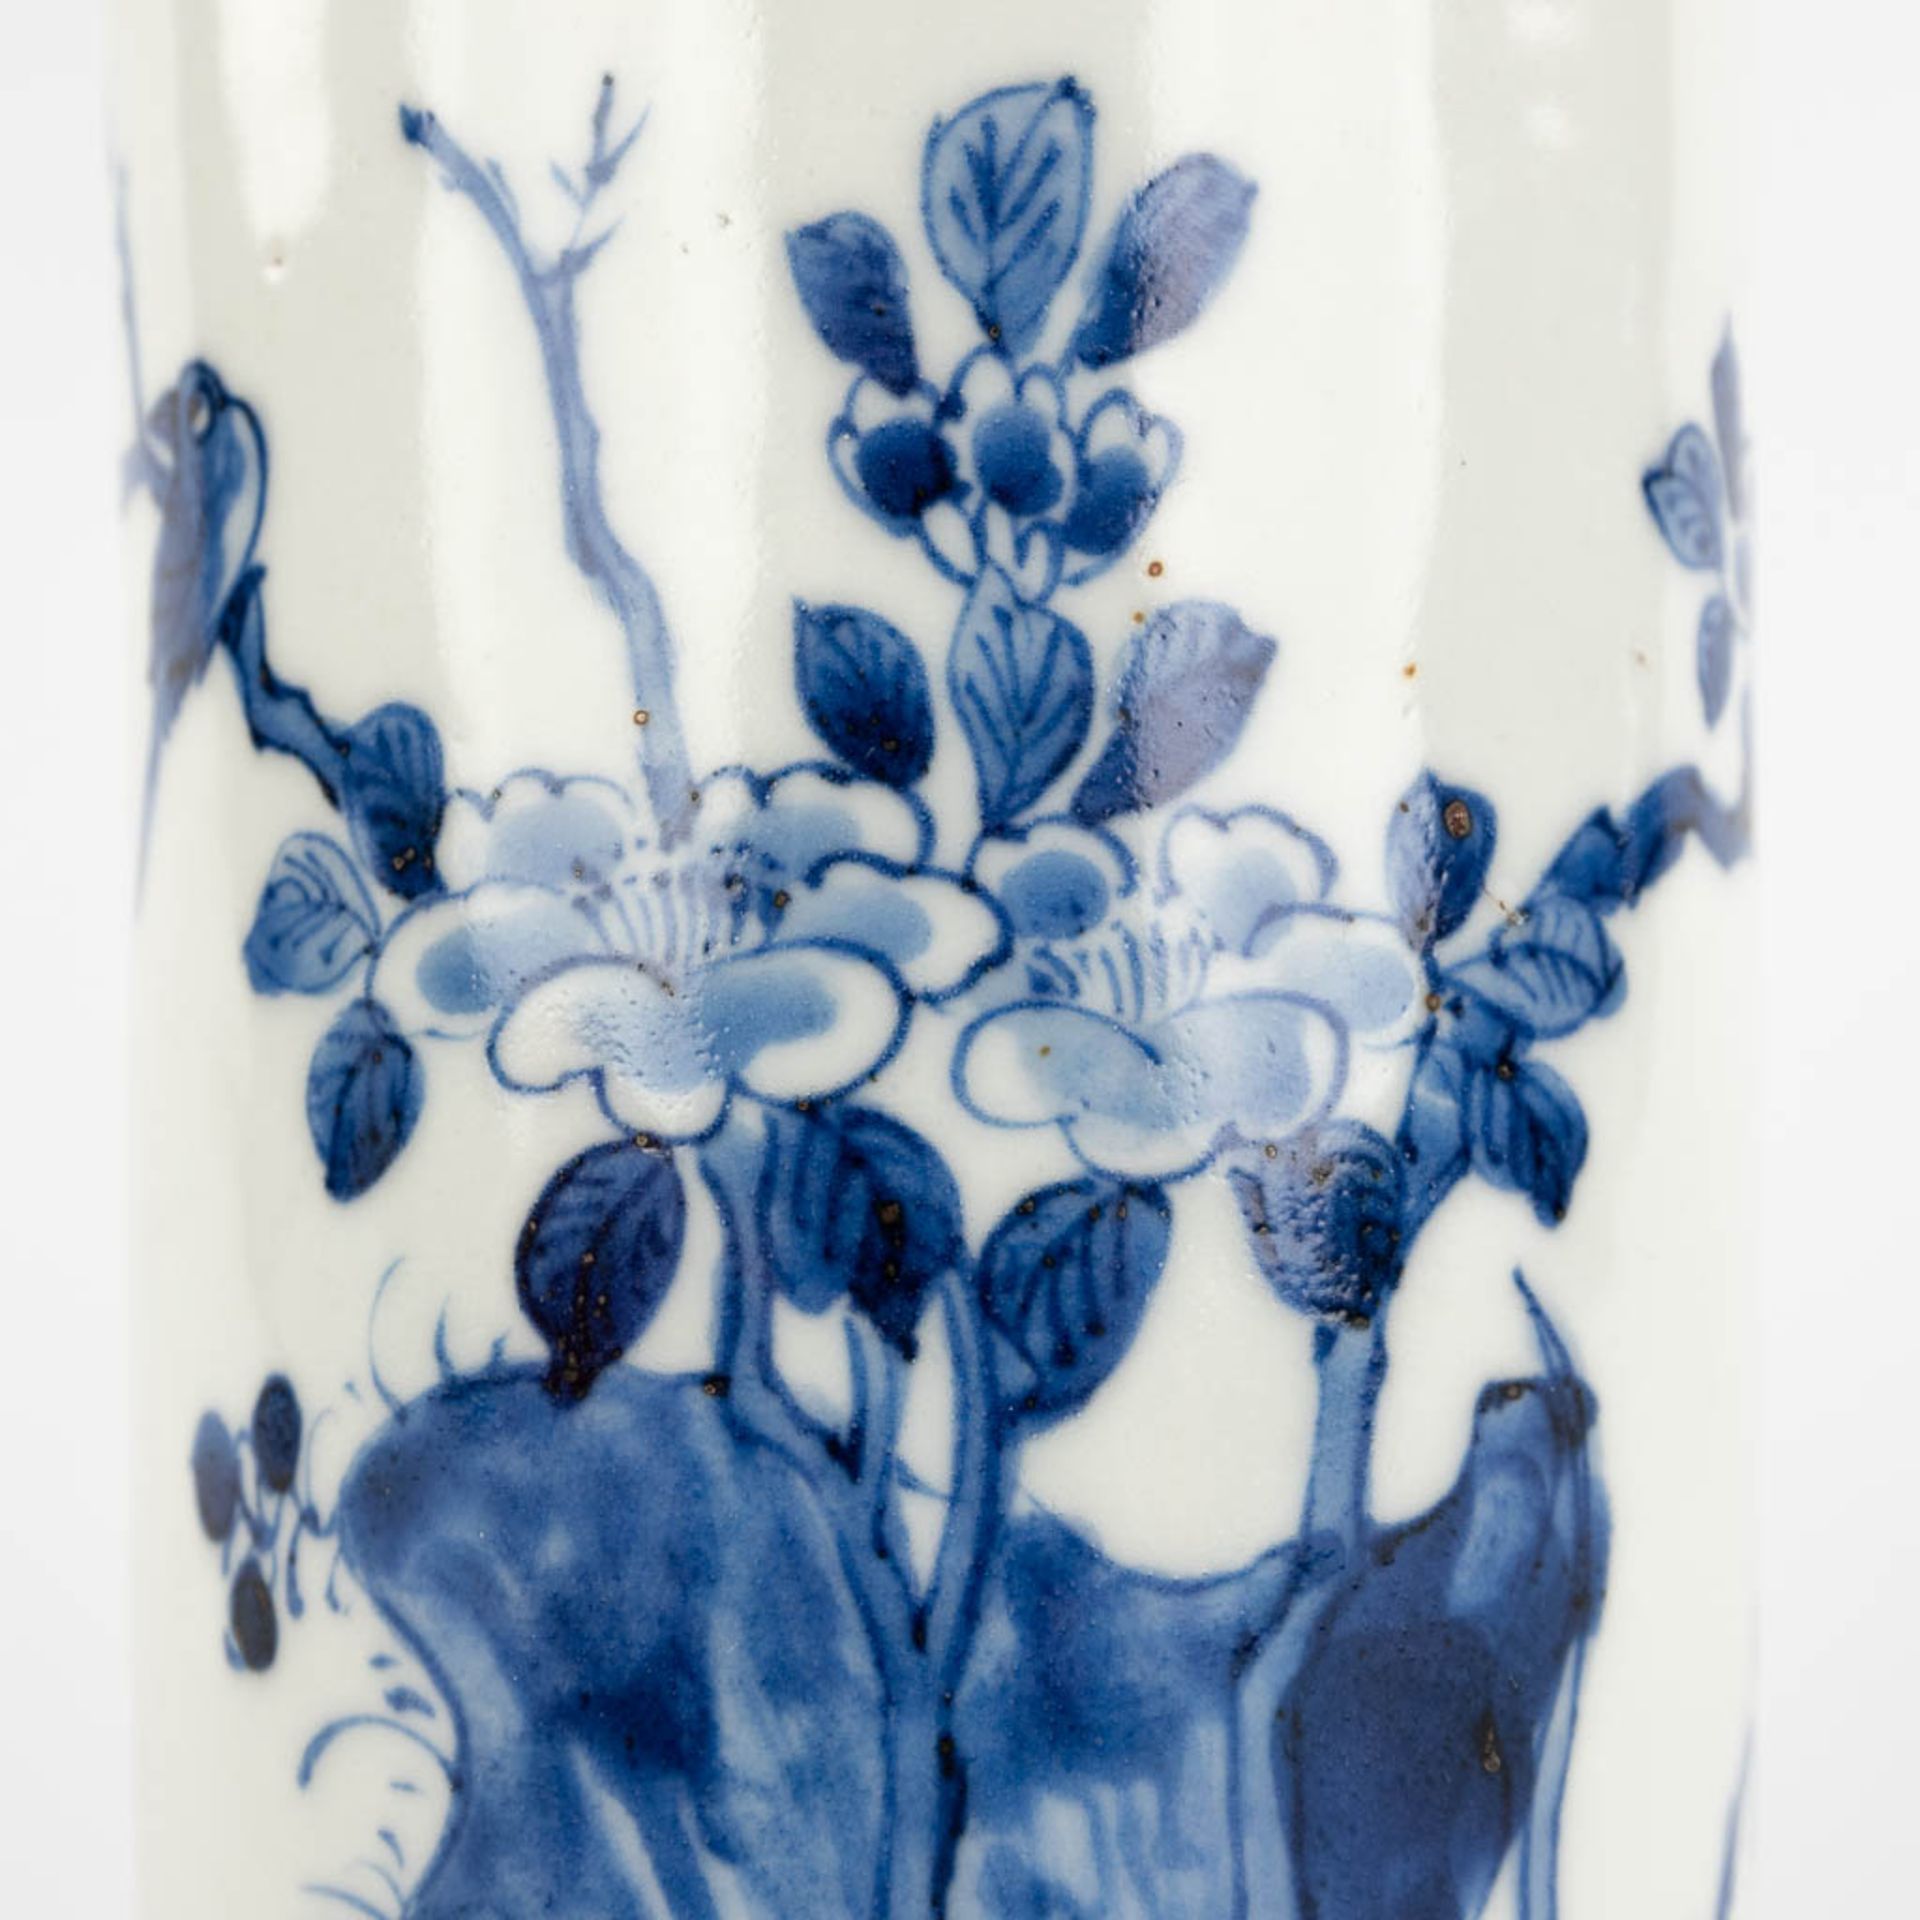 A Chinese long brushpot with blue-white decor of fauna and flora. 19th C. (H:17,5 x D:9,5 cm) - Image 11 of 11